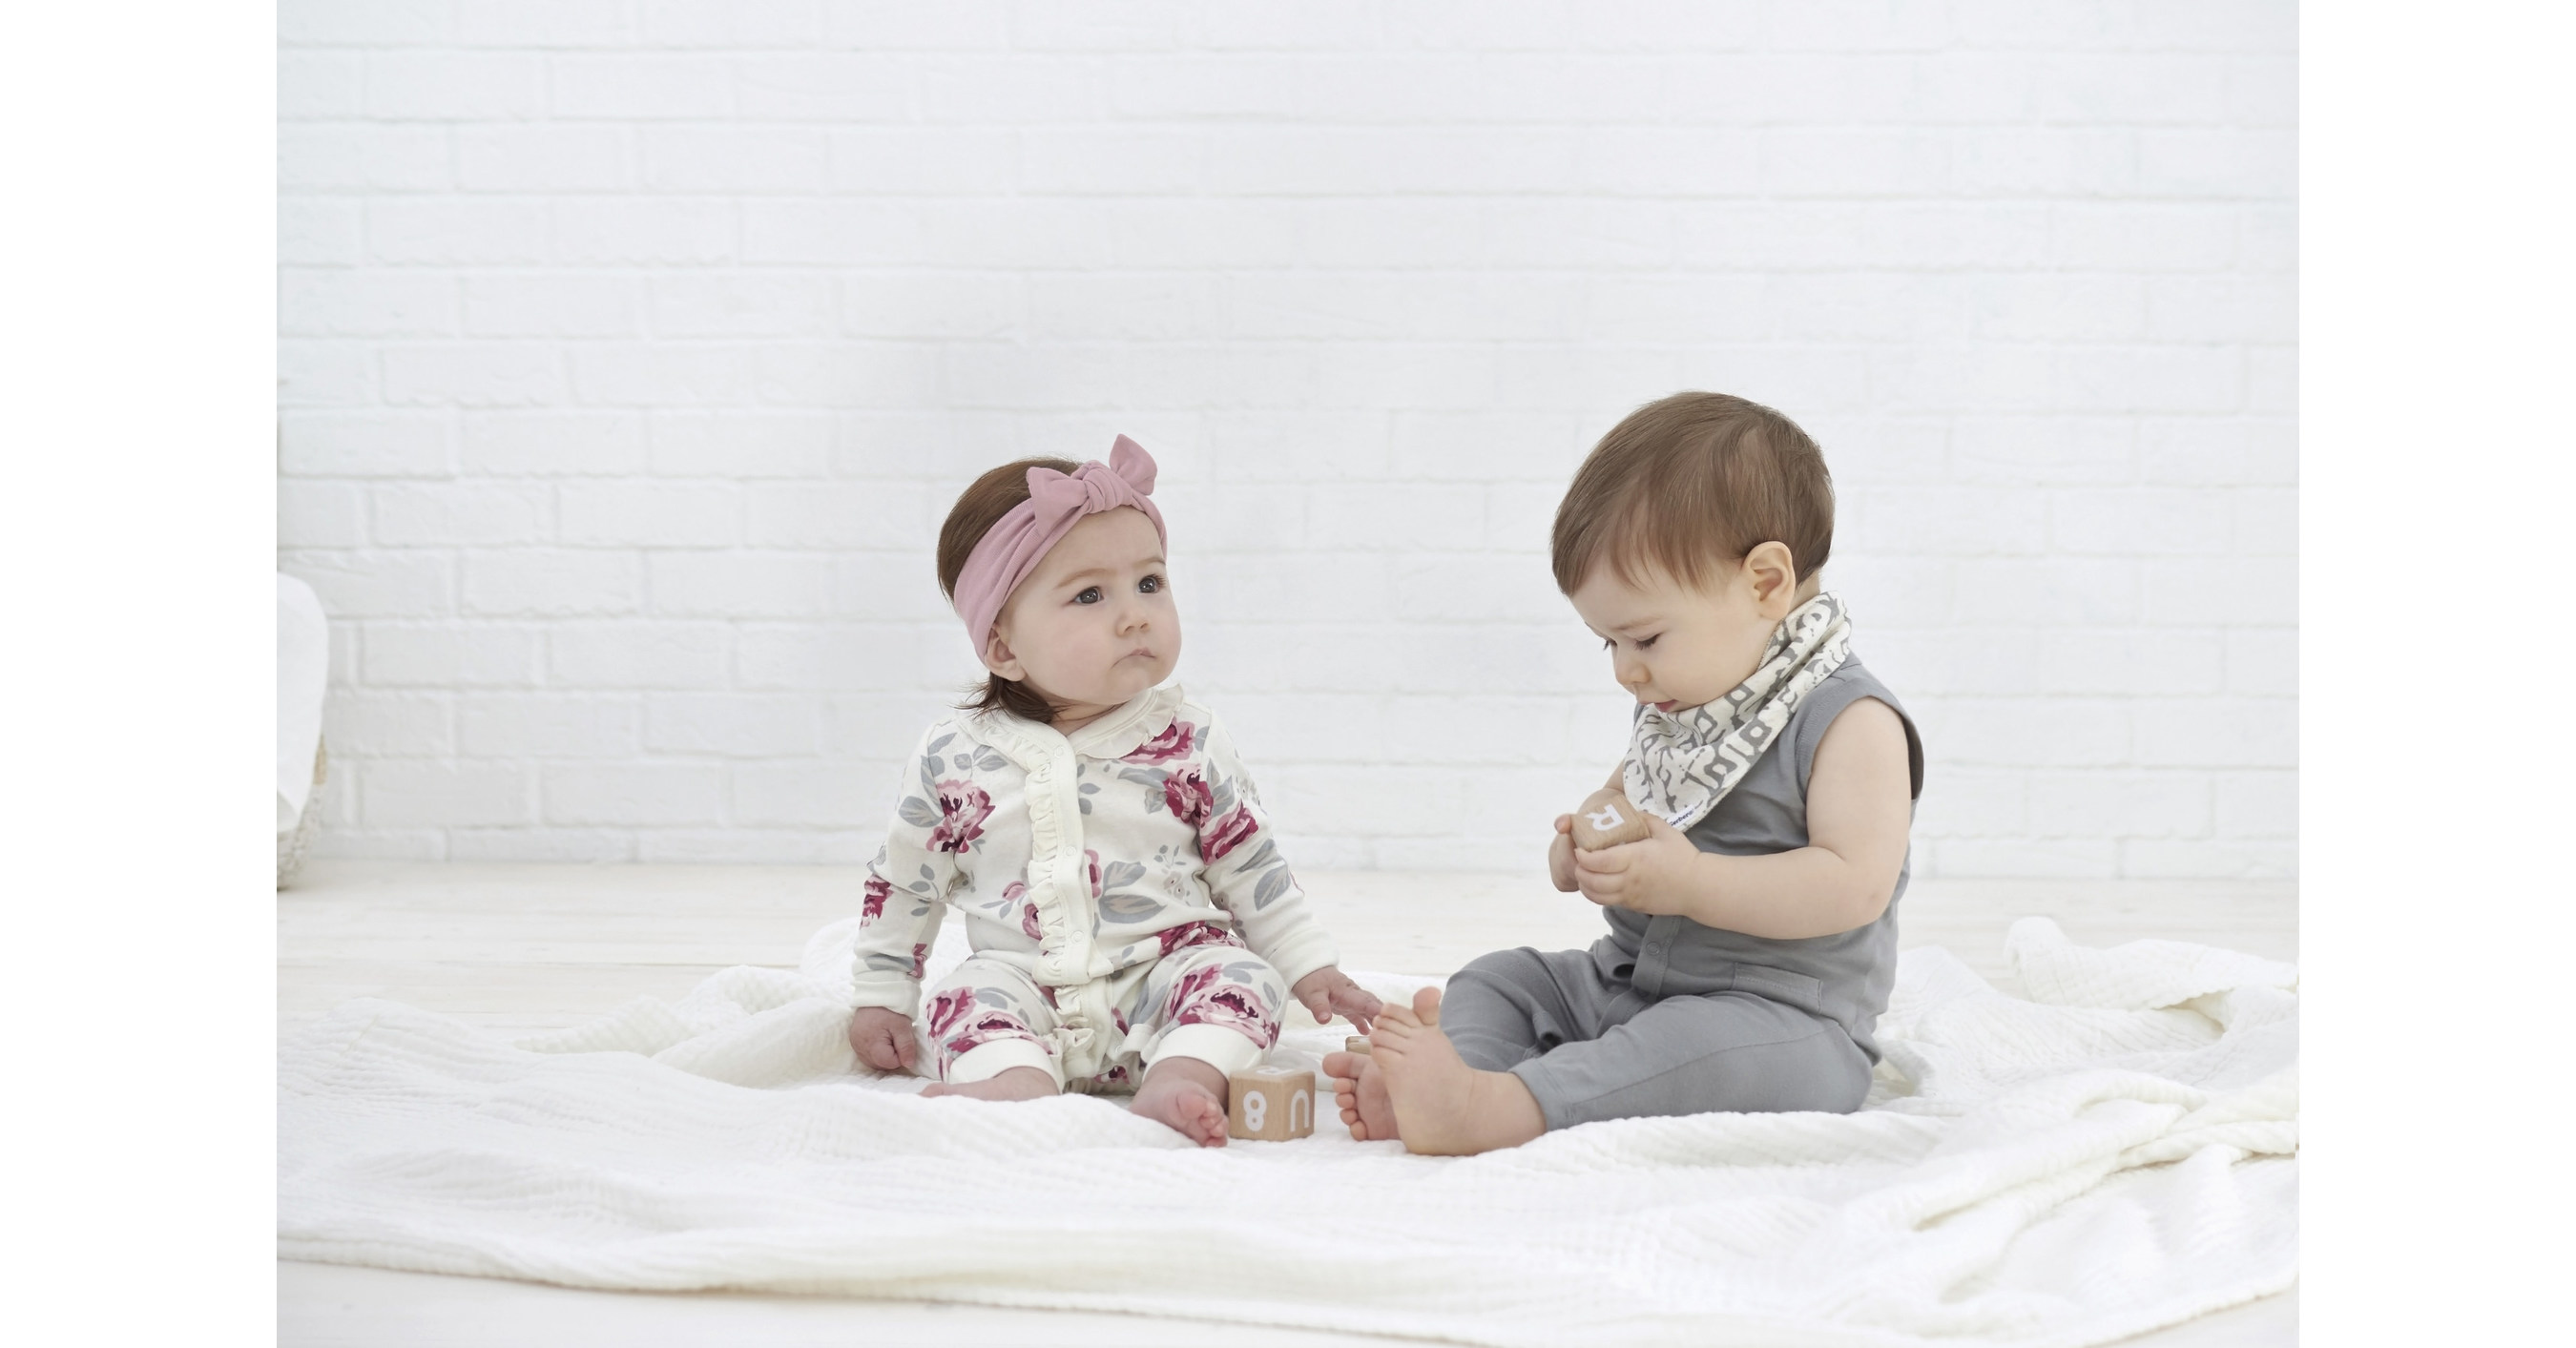 Gerber Childrenswear Launches New Elevated Line of Baby Essentials